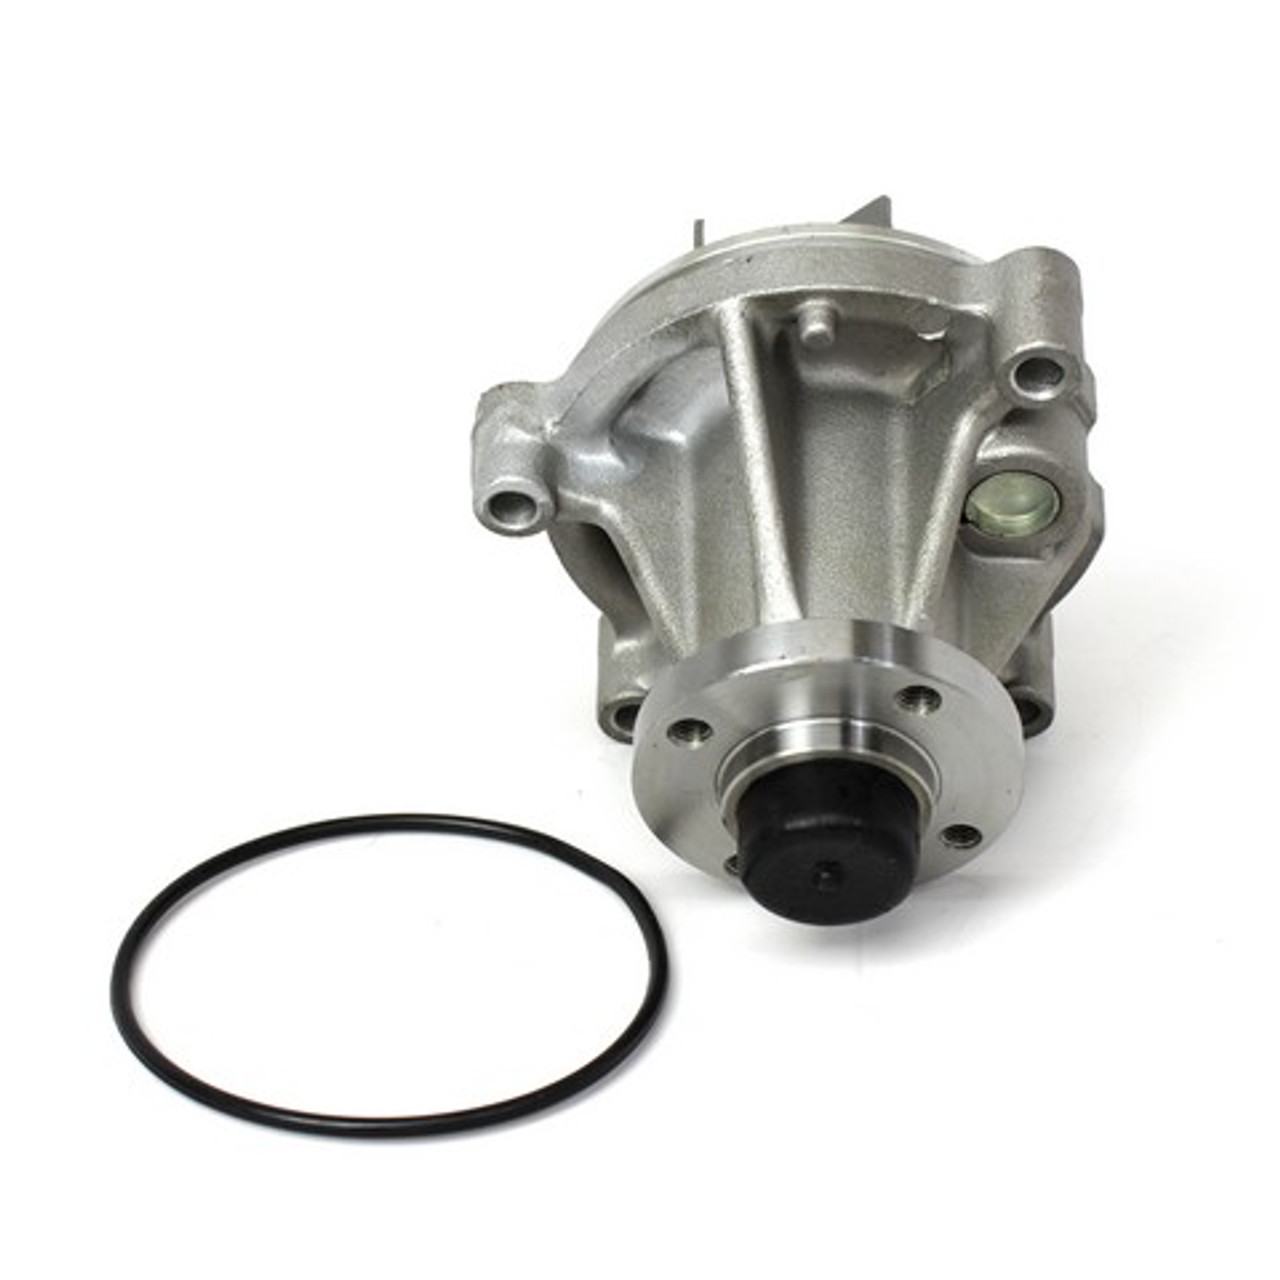 Water Pump 4.6L 2010 Ford E-250 - WP4170.45